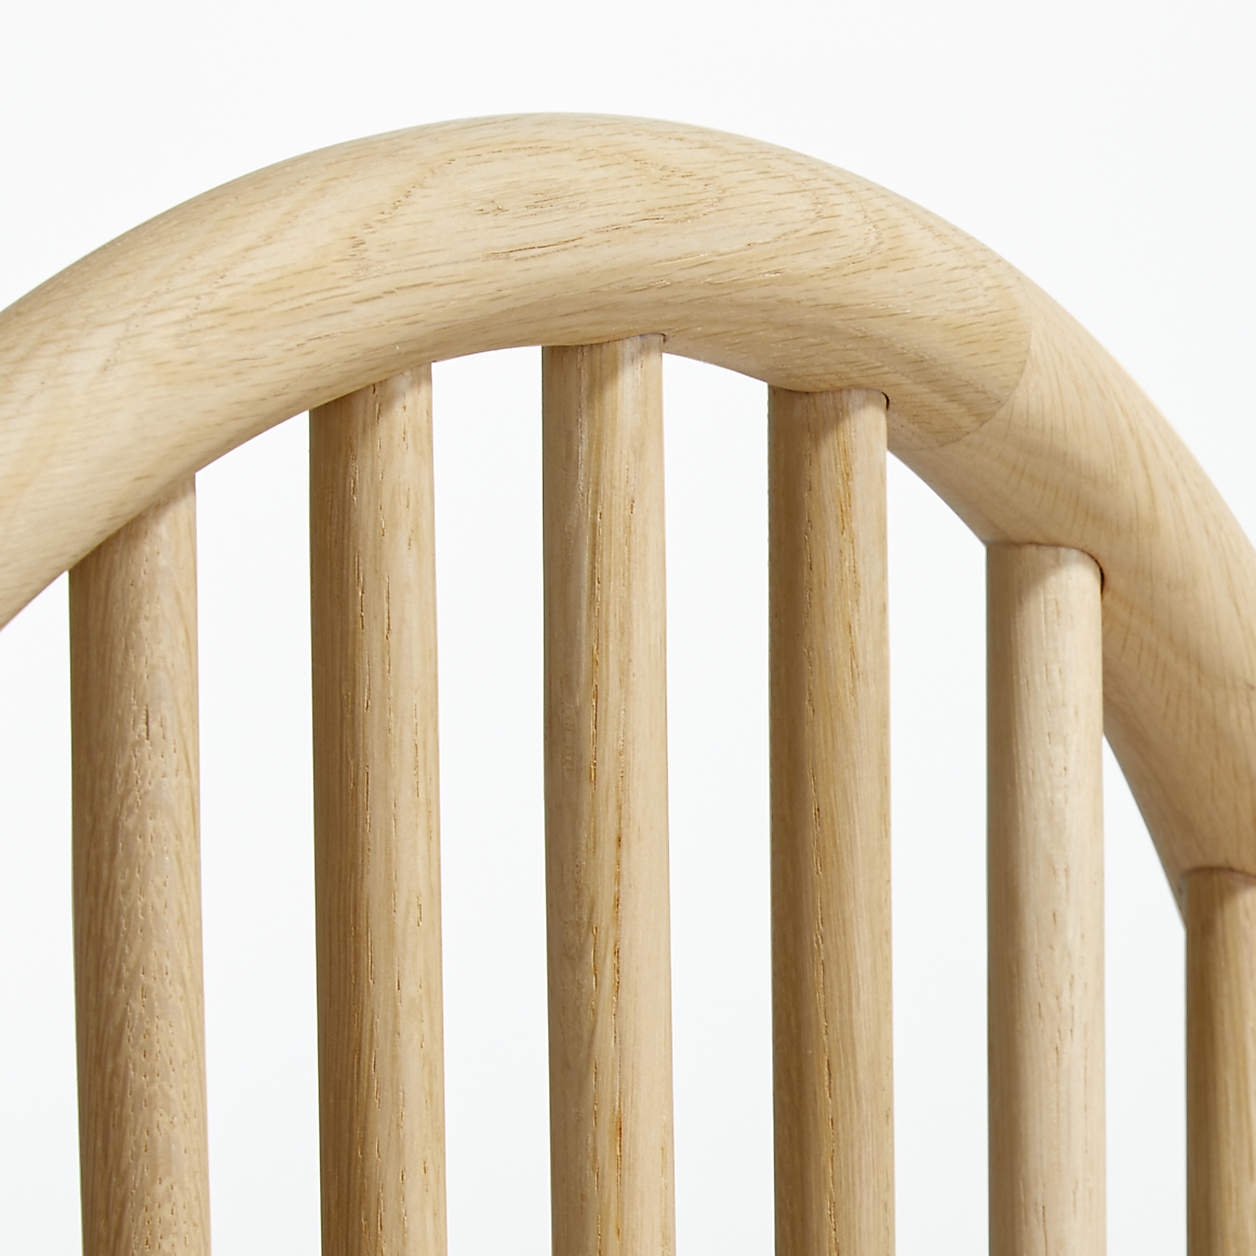 Canyon Natural Spindle Wood Convertible Baby Crib by Leanne Ford - Image 11